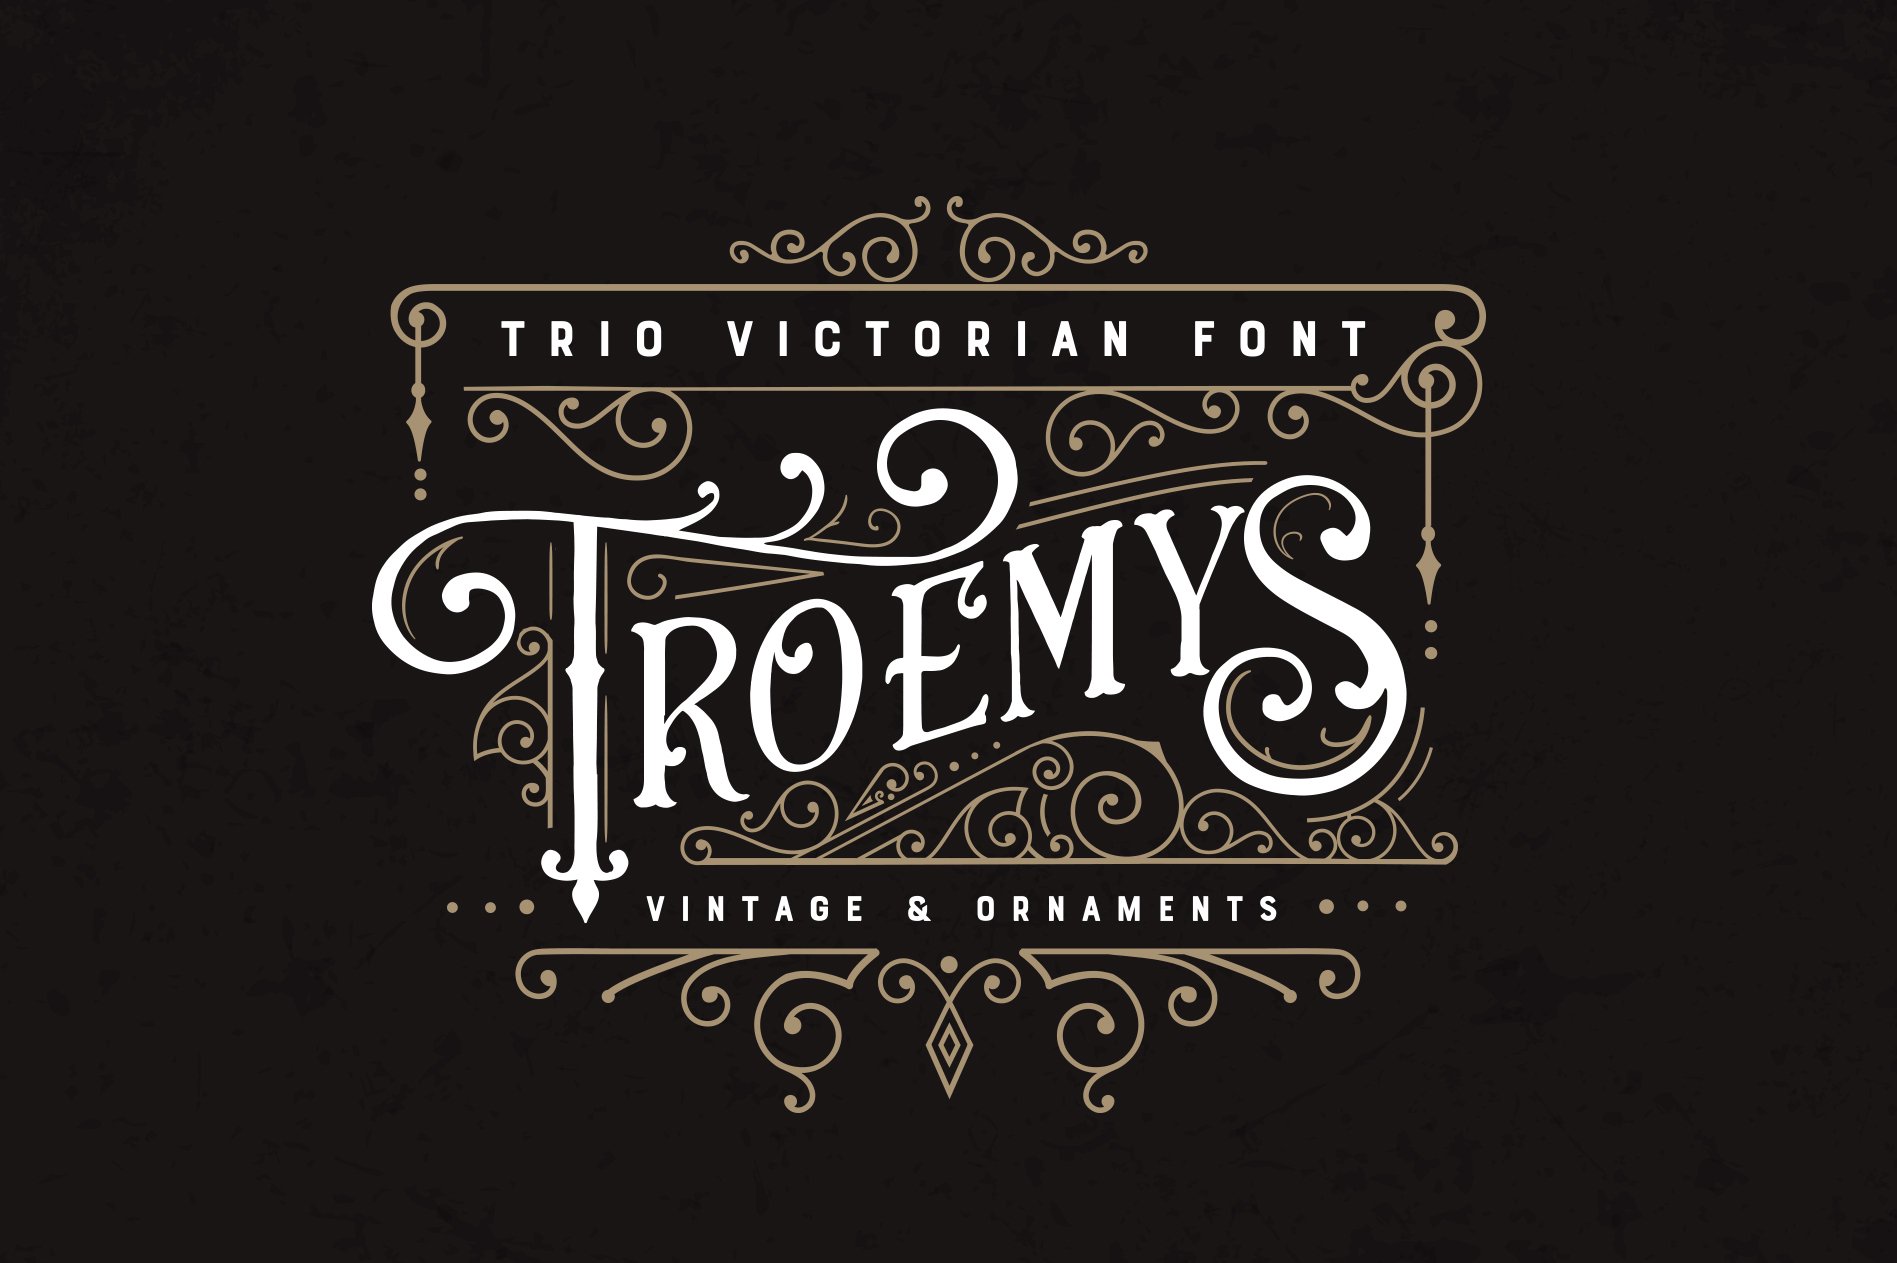 Troemys Font Trio and extras cover image.